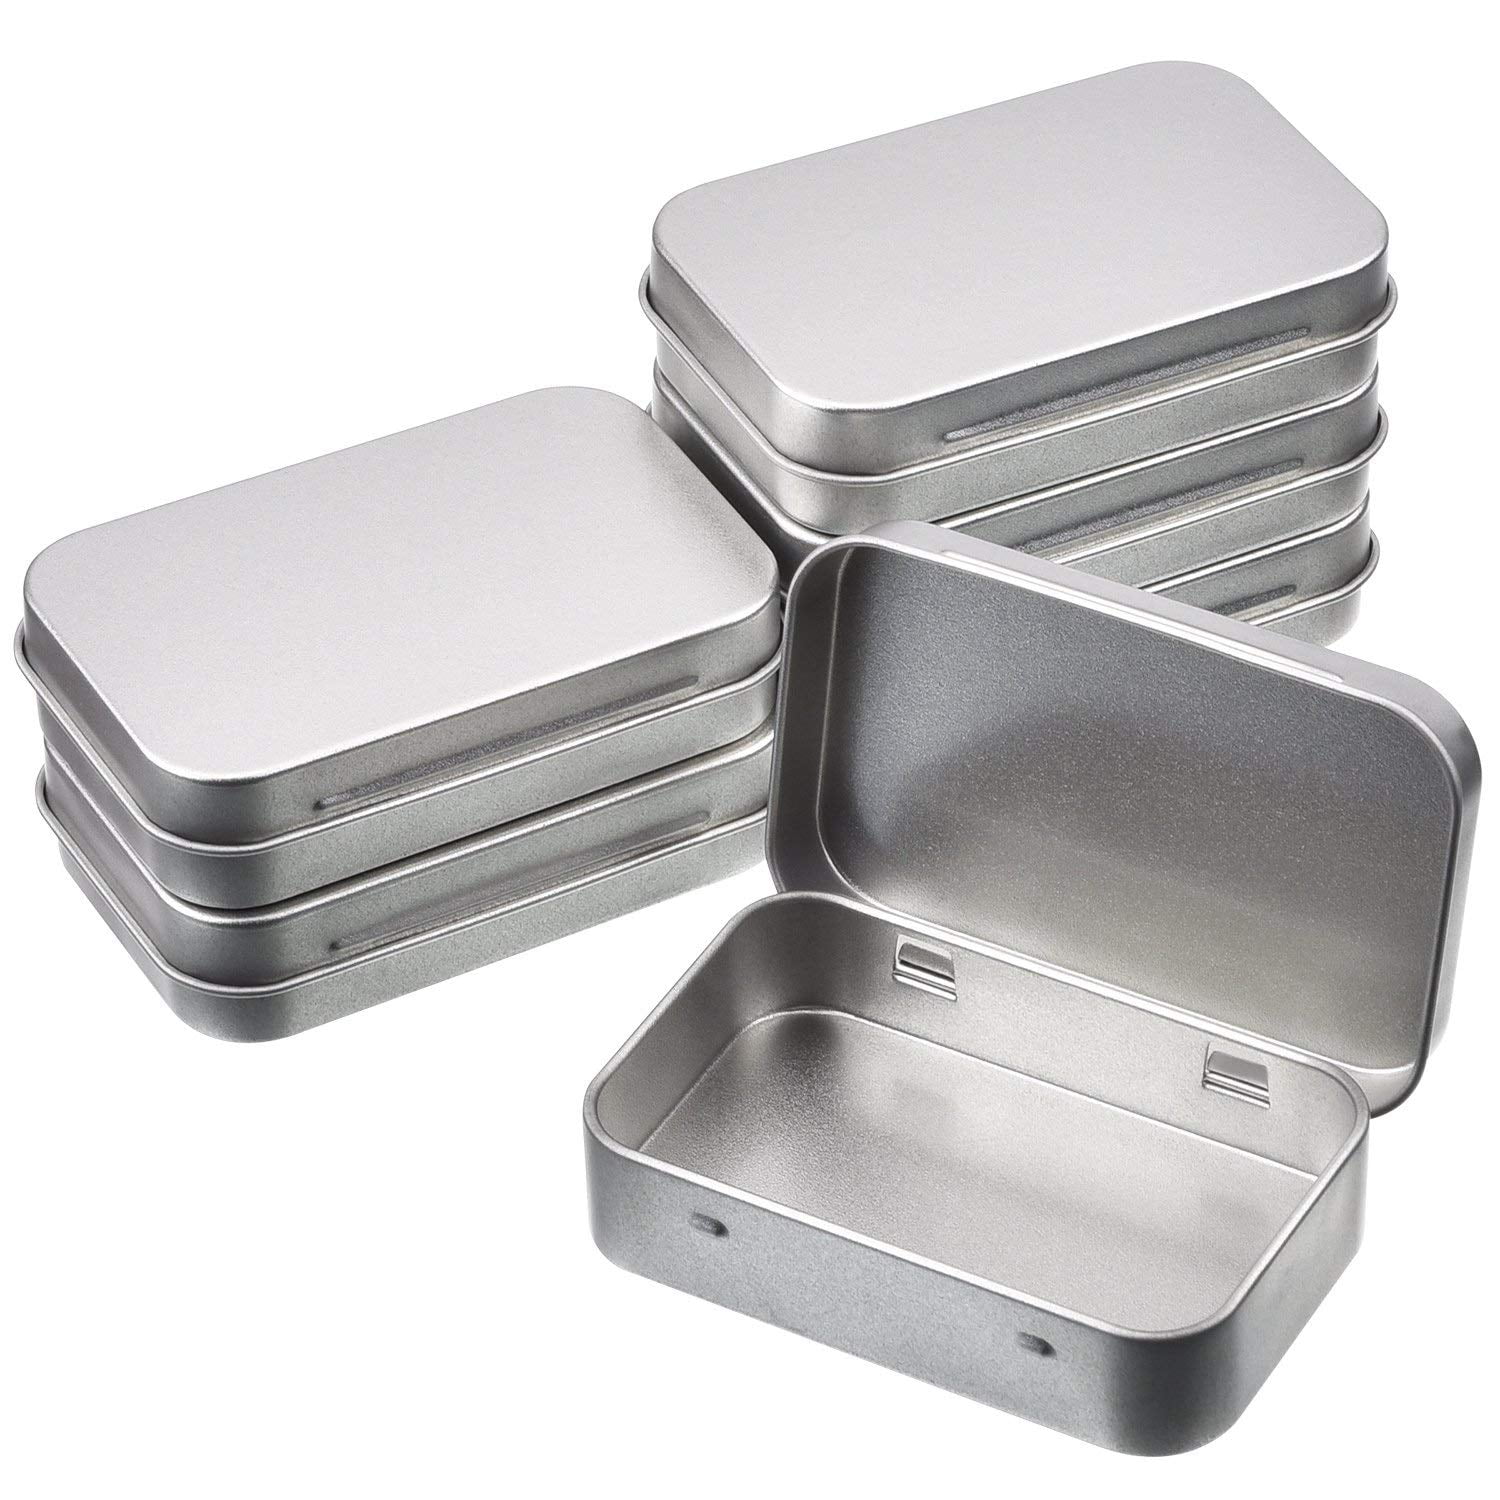 Silver Small Tin with Lid 2 Pcs Metal Hinged Tin Box Container Mini Portable Small Storage Container Kit Tin Box Container Home Storage 4.5x3.3x0.9 inch Tin Empty Box 